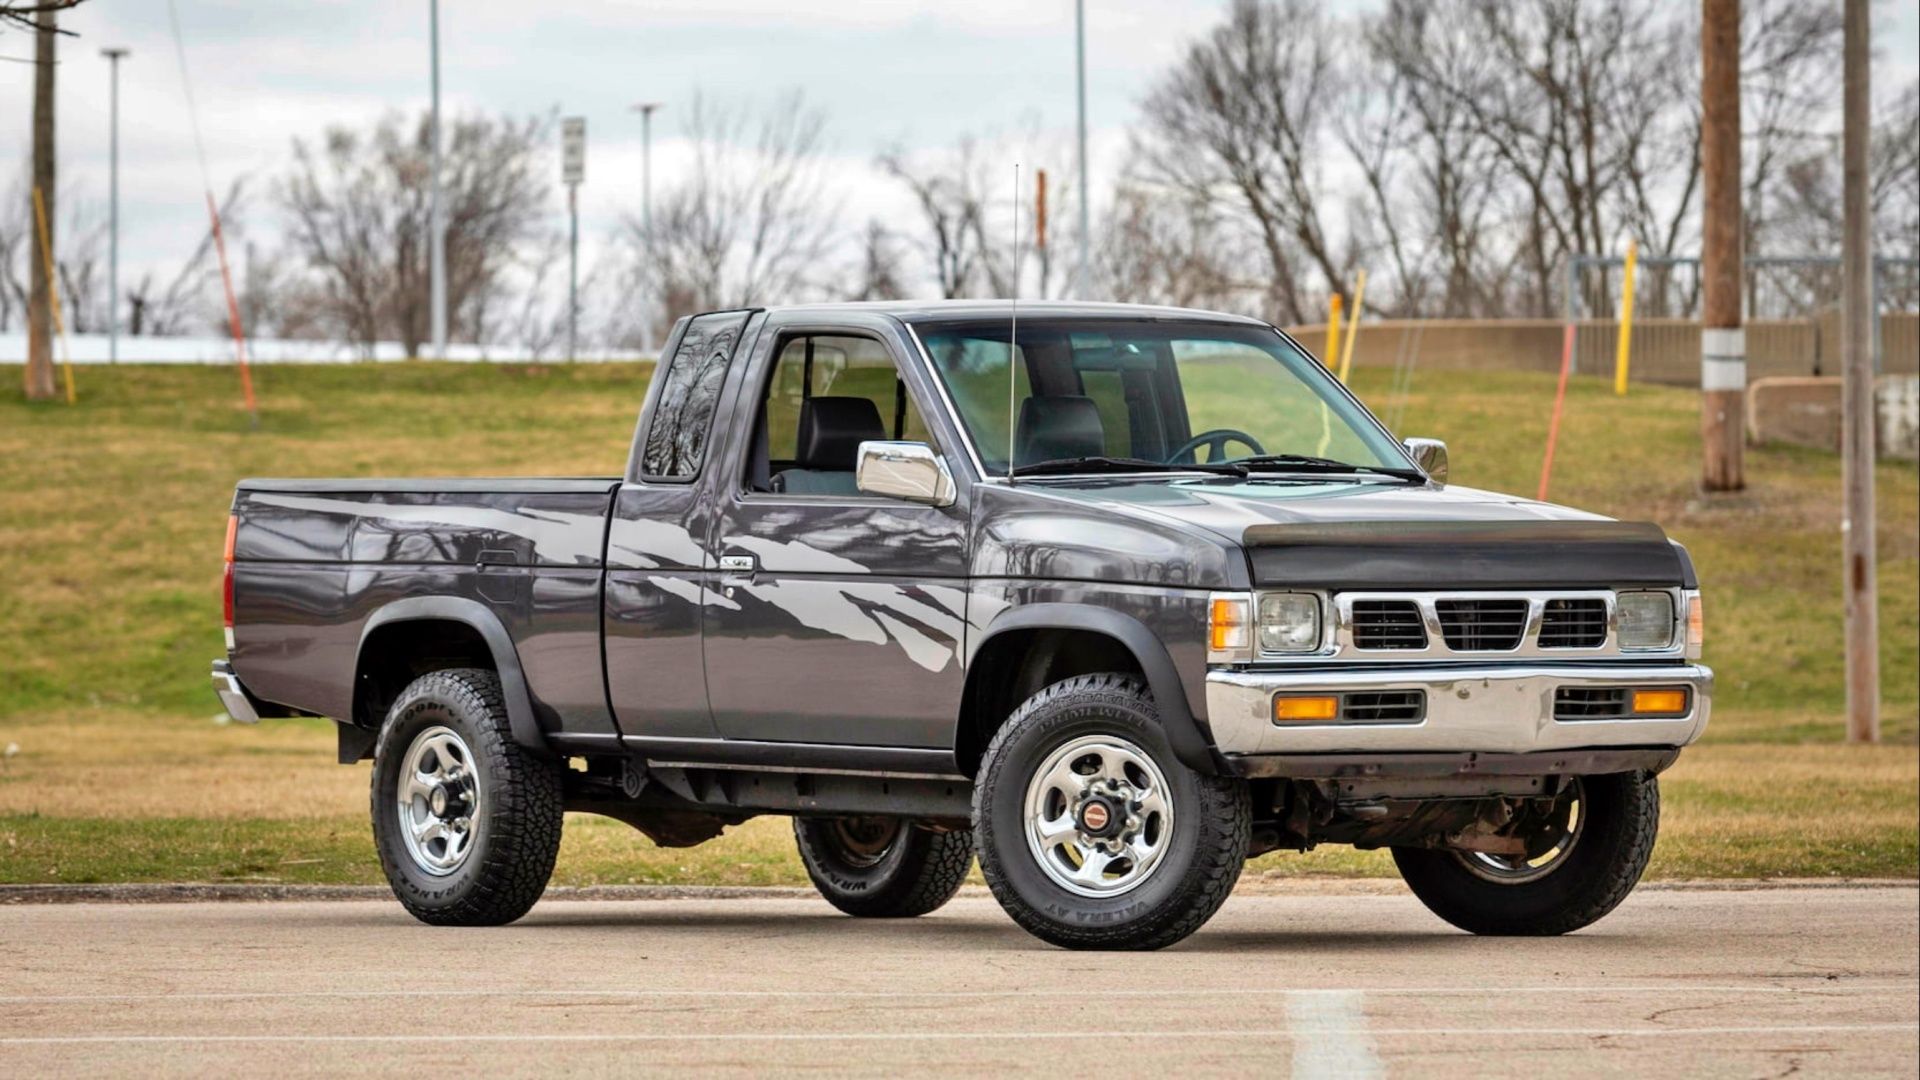 15 Things Every Purist Should Know About The Nissan Hardbody